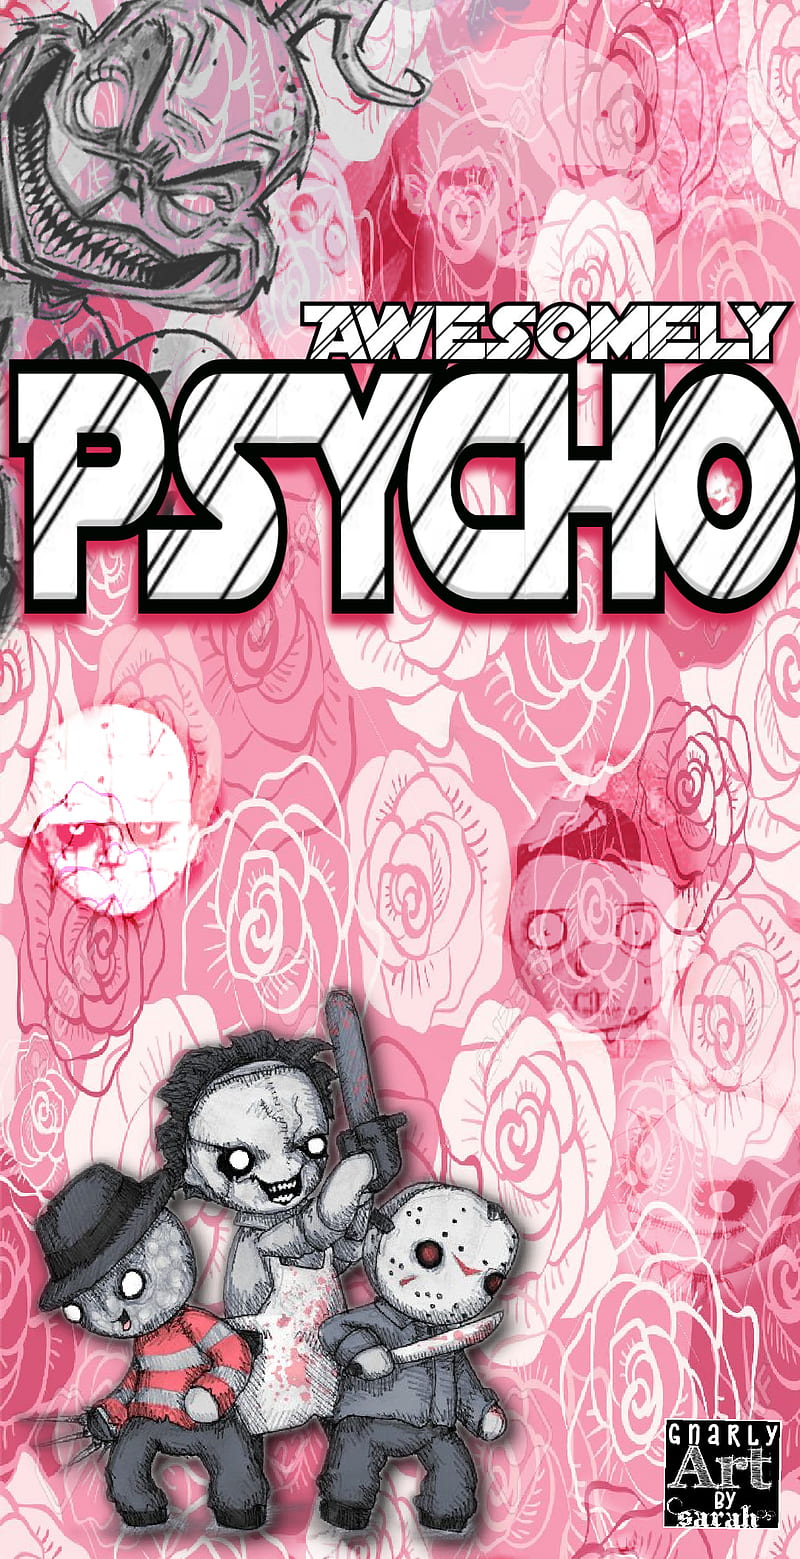 Awesomely Psycho, awesome, cool, freddy, girly, horror, jason, killer, scary, serial, HD phone wallpaper